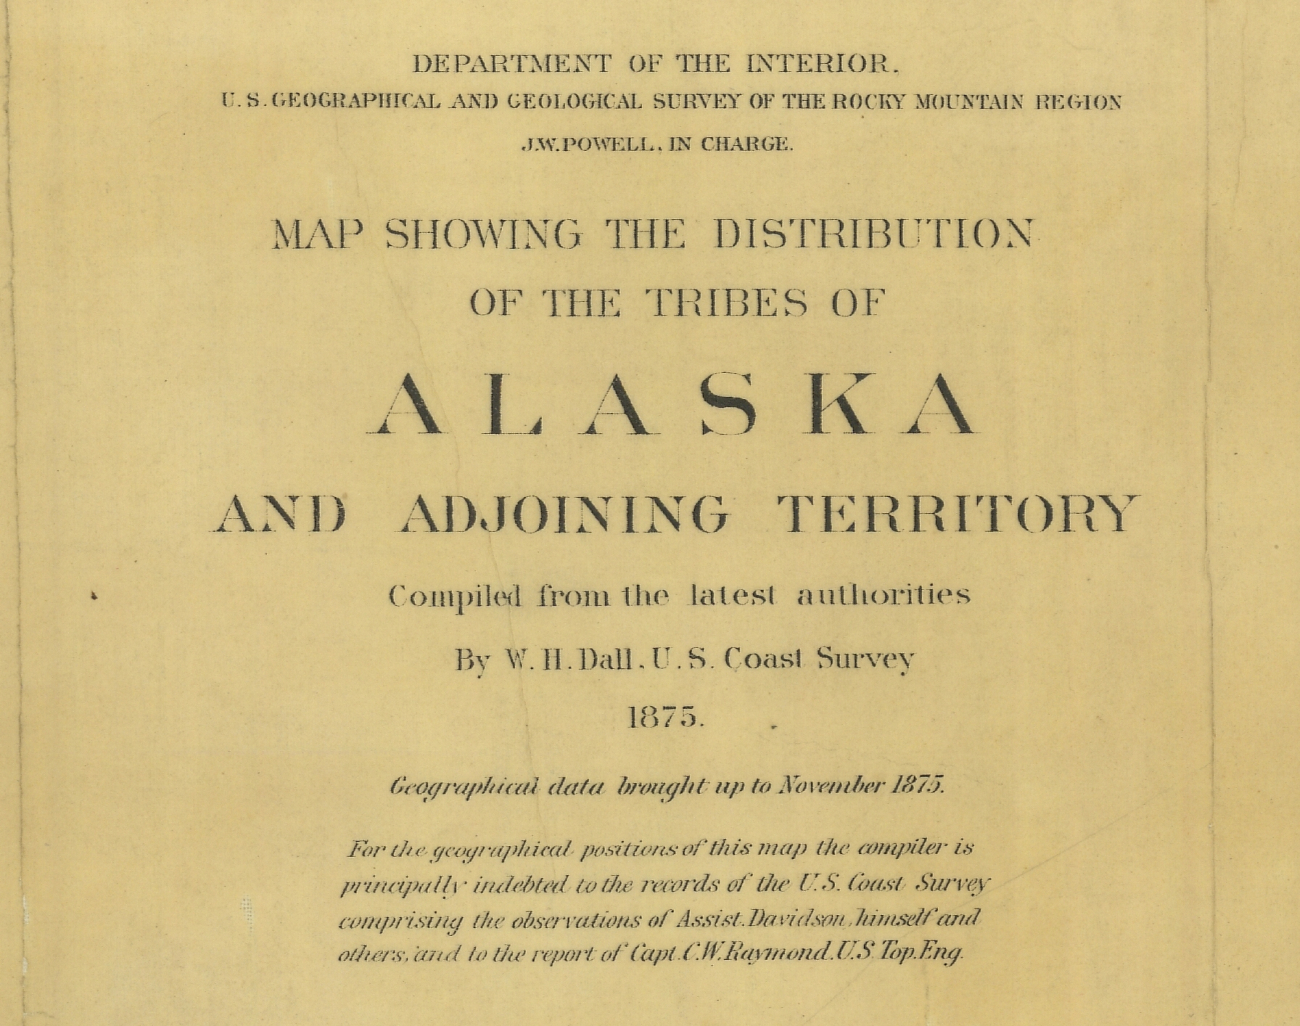 Title block of Map Showing the Distribution of the Tribes of Alaska andAdjoining Terrritory showing contribution of William H